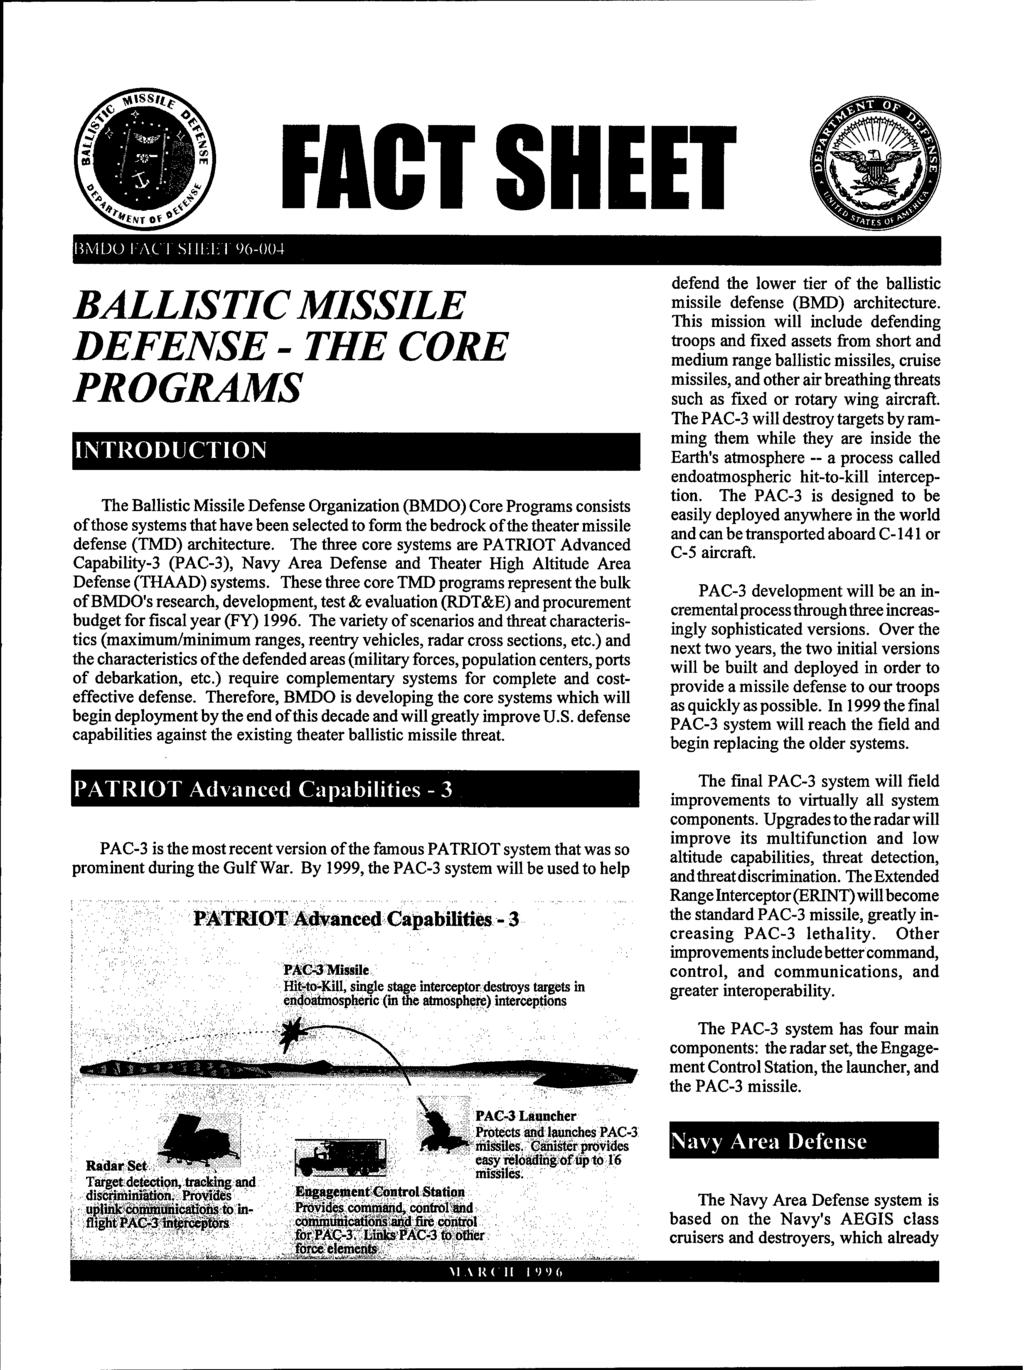 FACT SHEET BMDO I ACT SI ll-lil 96-004 BALLISTIC MISSILE DEFENSE - THE CORE PROGRAMS INTRODUCTION The Ballistic Missile Defense Organization (BMDO) Core Programs consists of those systems that have